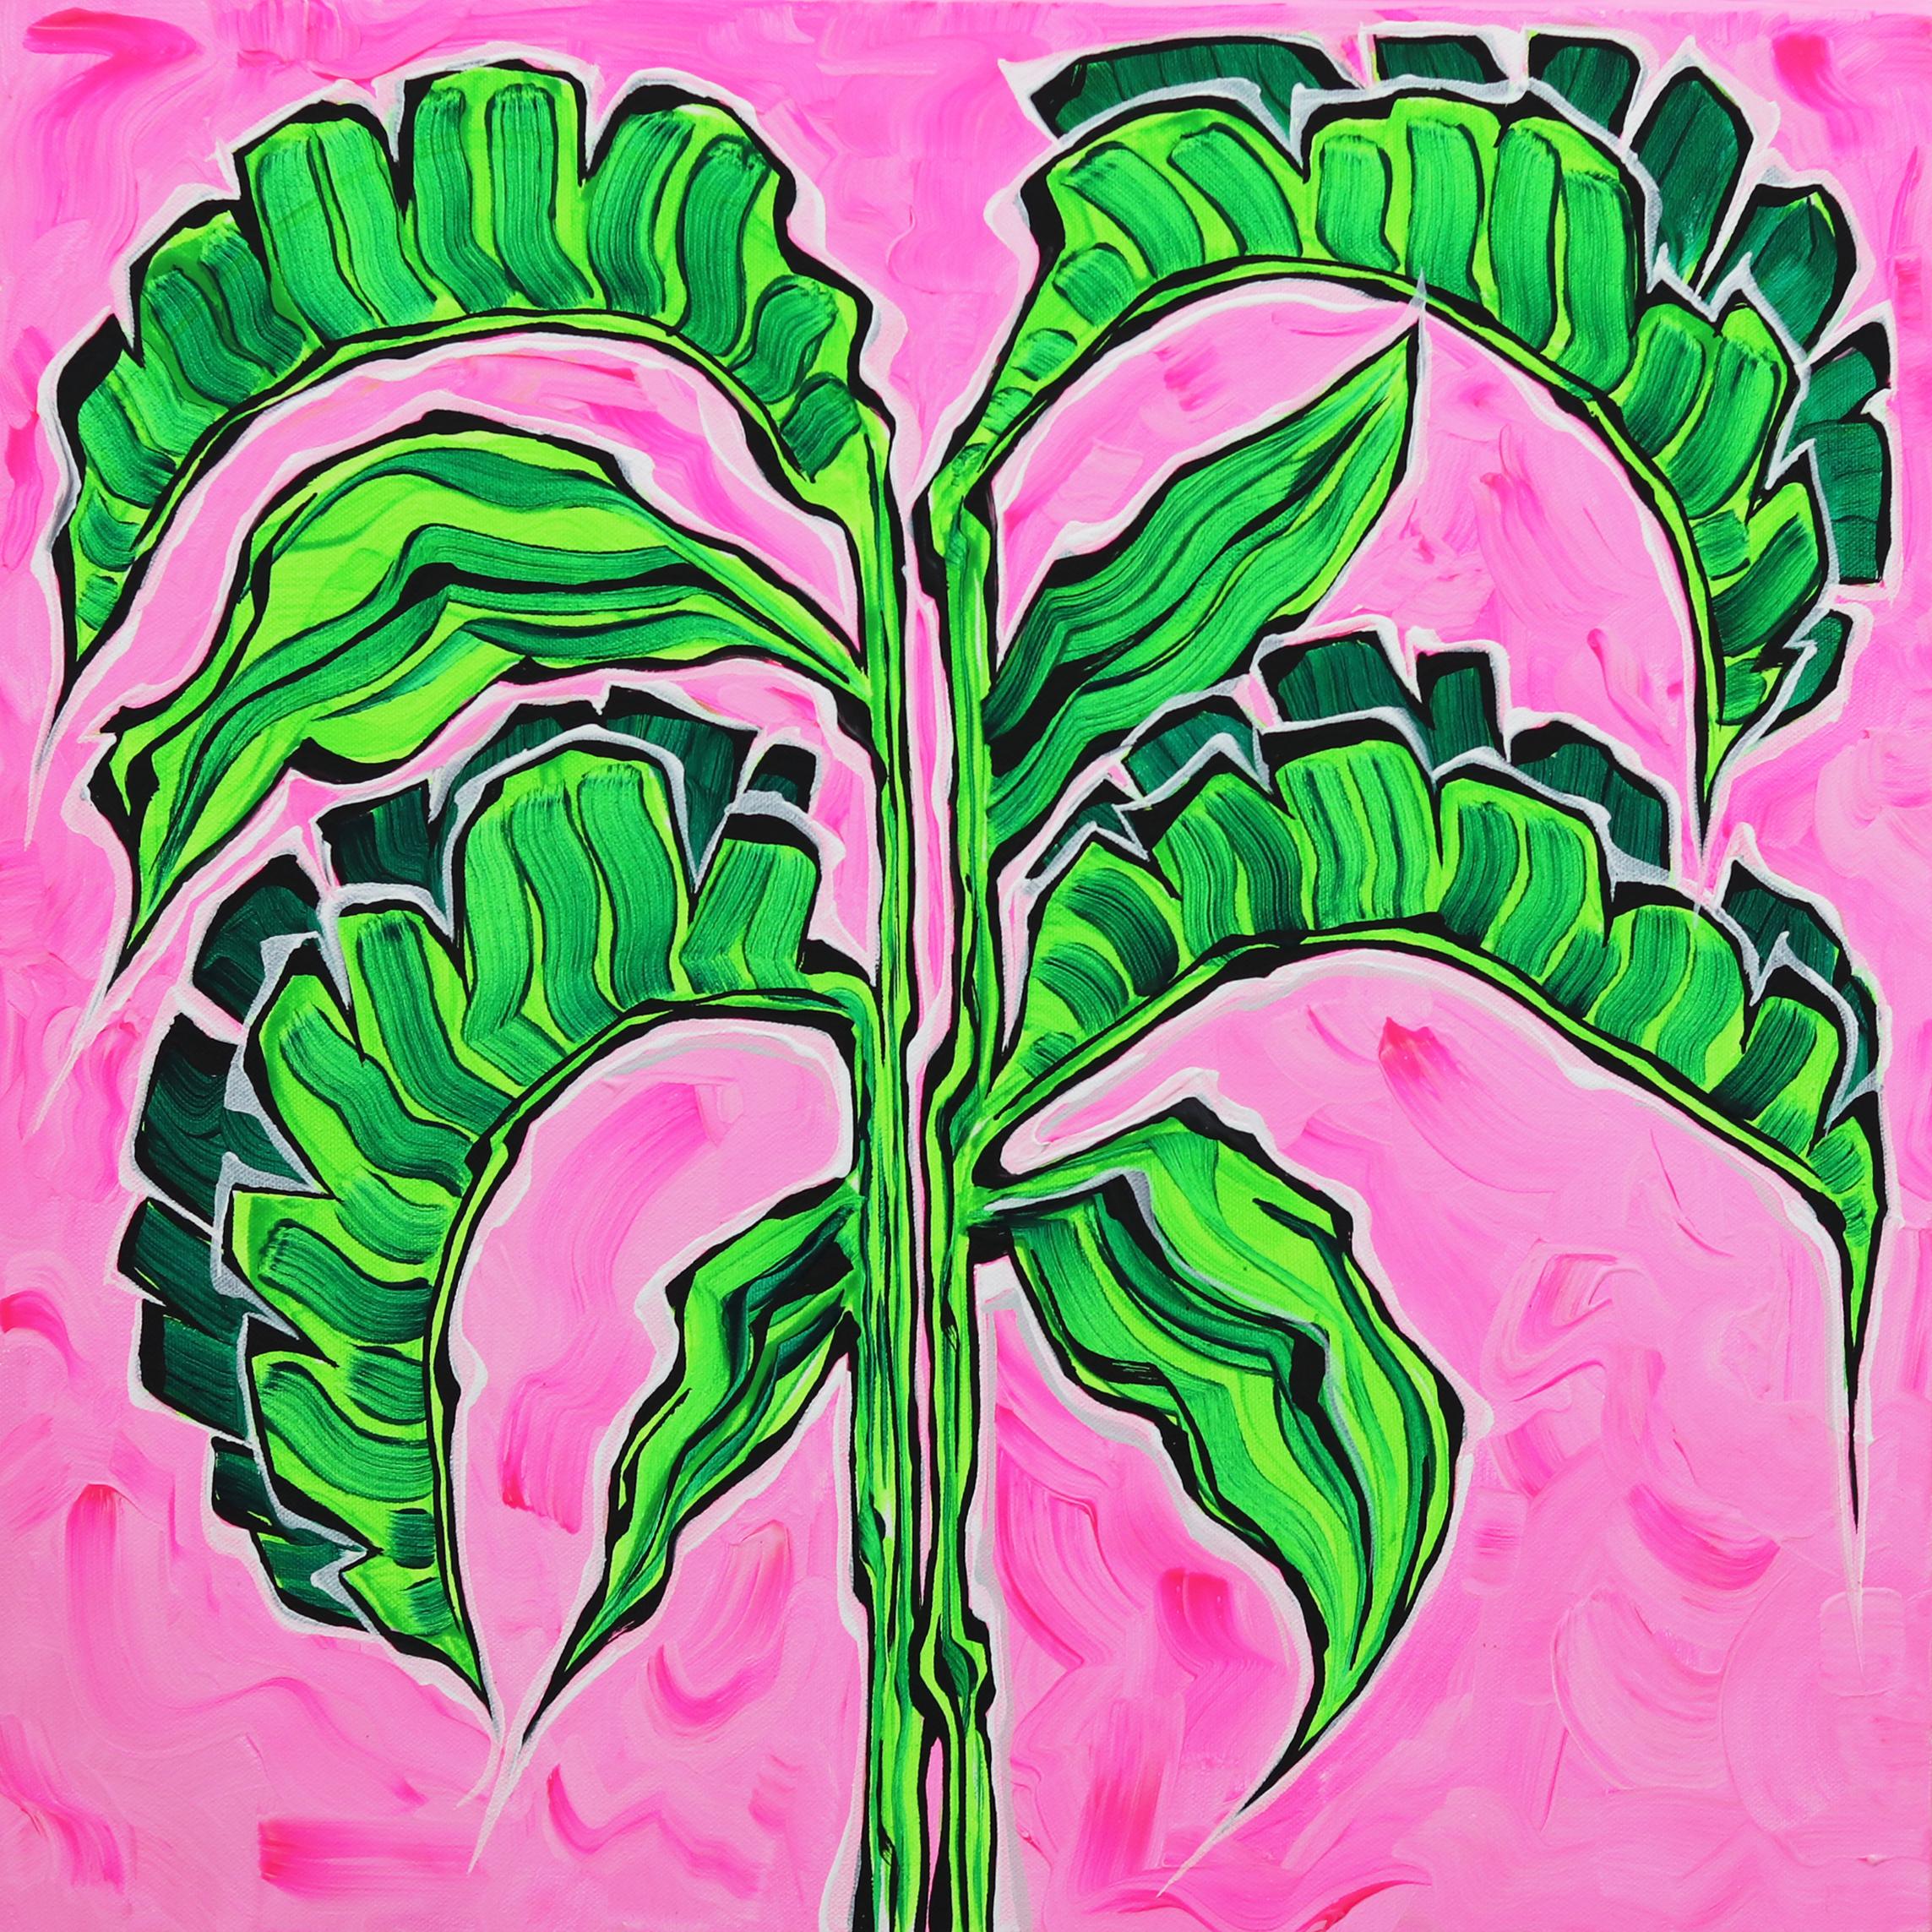 Pink Sky II - Colorful Original Pop Art Green Palm on Vibrant Pink Painting